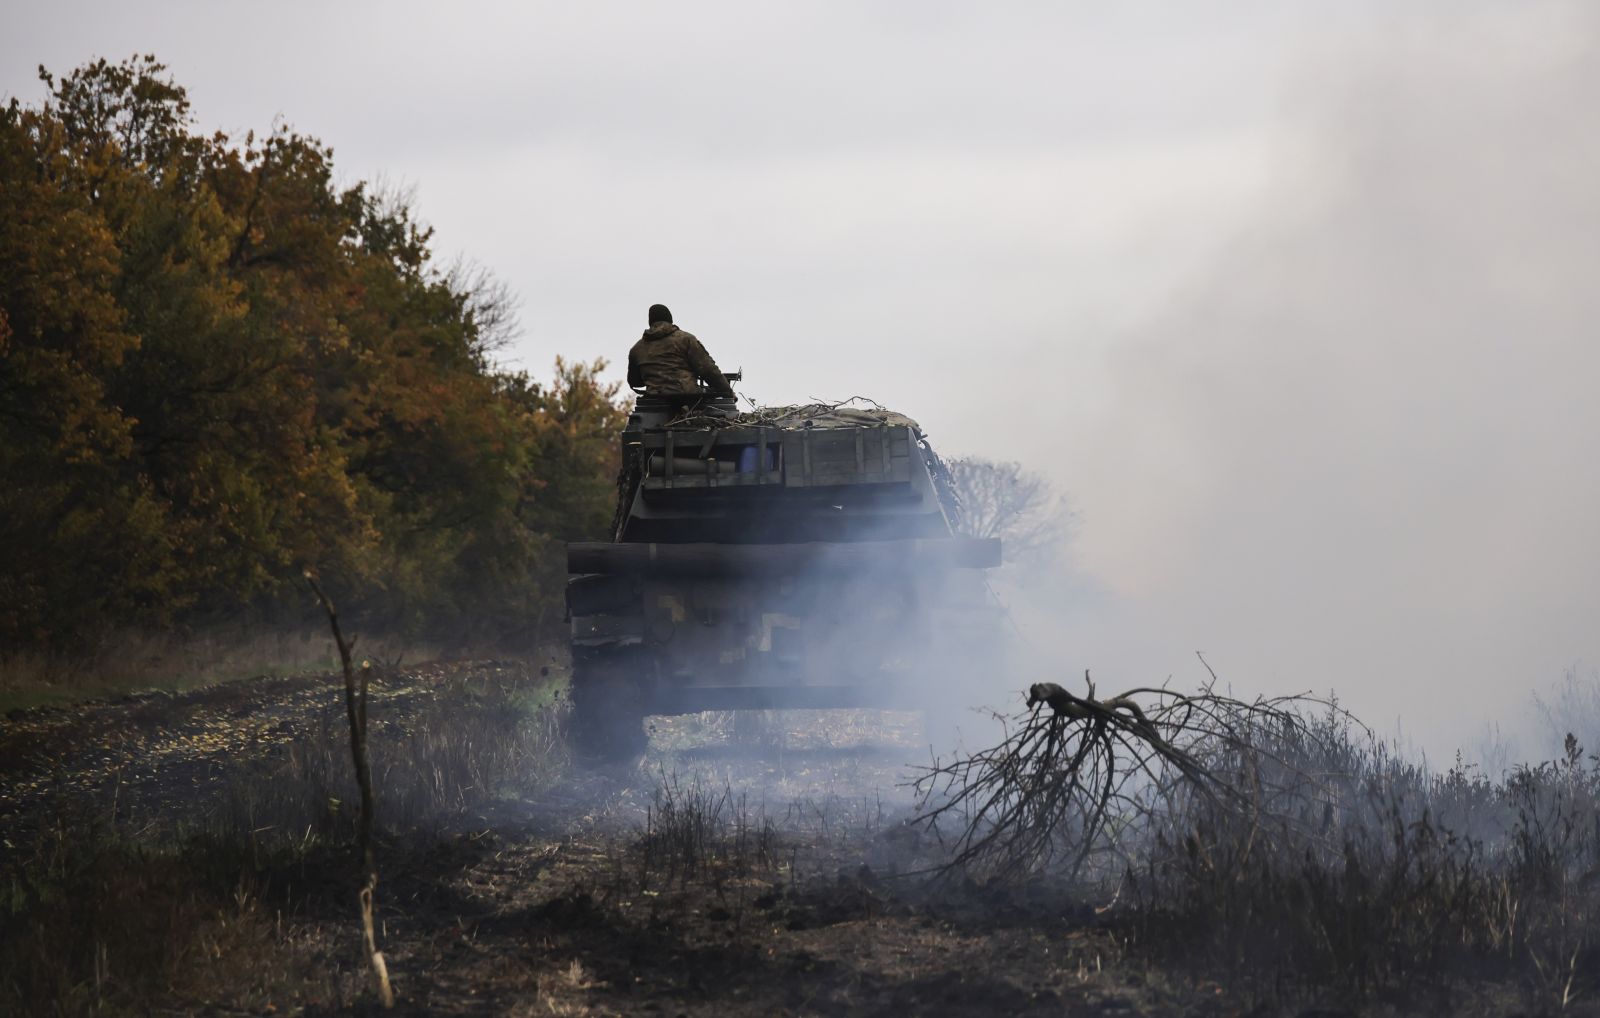 epa10264071 Ukrainian self-propelled artillery near a frontline not far from the city of Bakhmut, Donetsk region, eastern Ukraine, 24 October 2022 (issued 25 October 2022). The Ukrainian army pushed Russian troops from occupied territory in the east and northeast of the country in counterattacks. Russian troops on 24 February entered Ukrainian territory, starting a conflict that has provoked destruction and a humanitarian crisis.  EPA/STRINGER